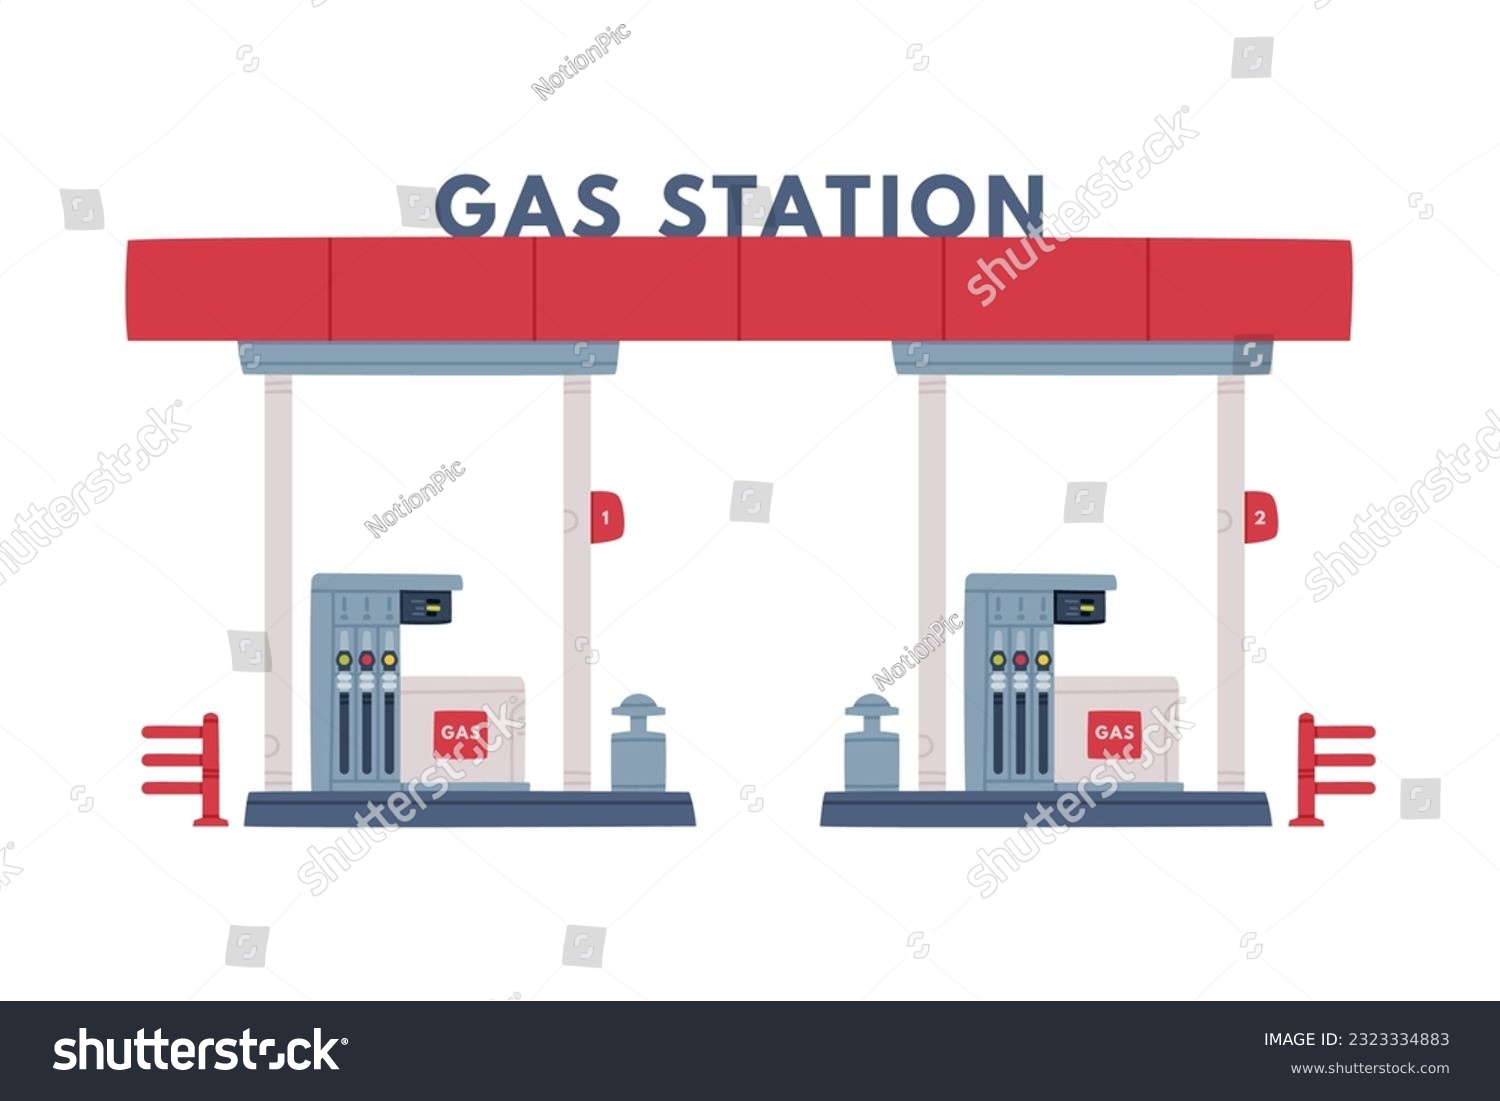 SVG of Gas Filling Station with Gasoline Pump as Facility with Fuel for Motor Vehicle Vector Illustration svg